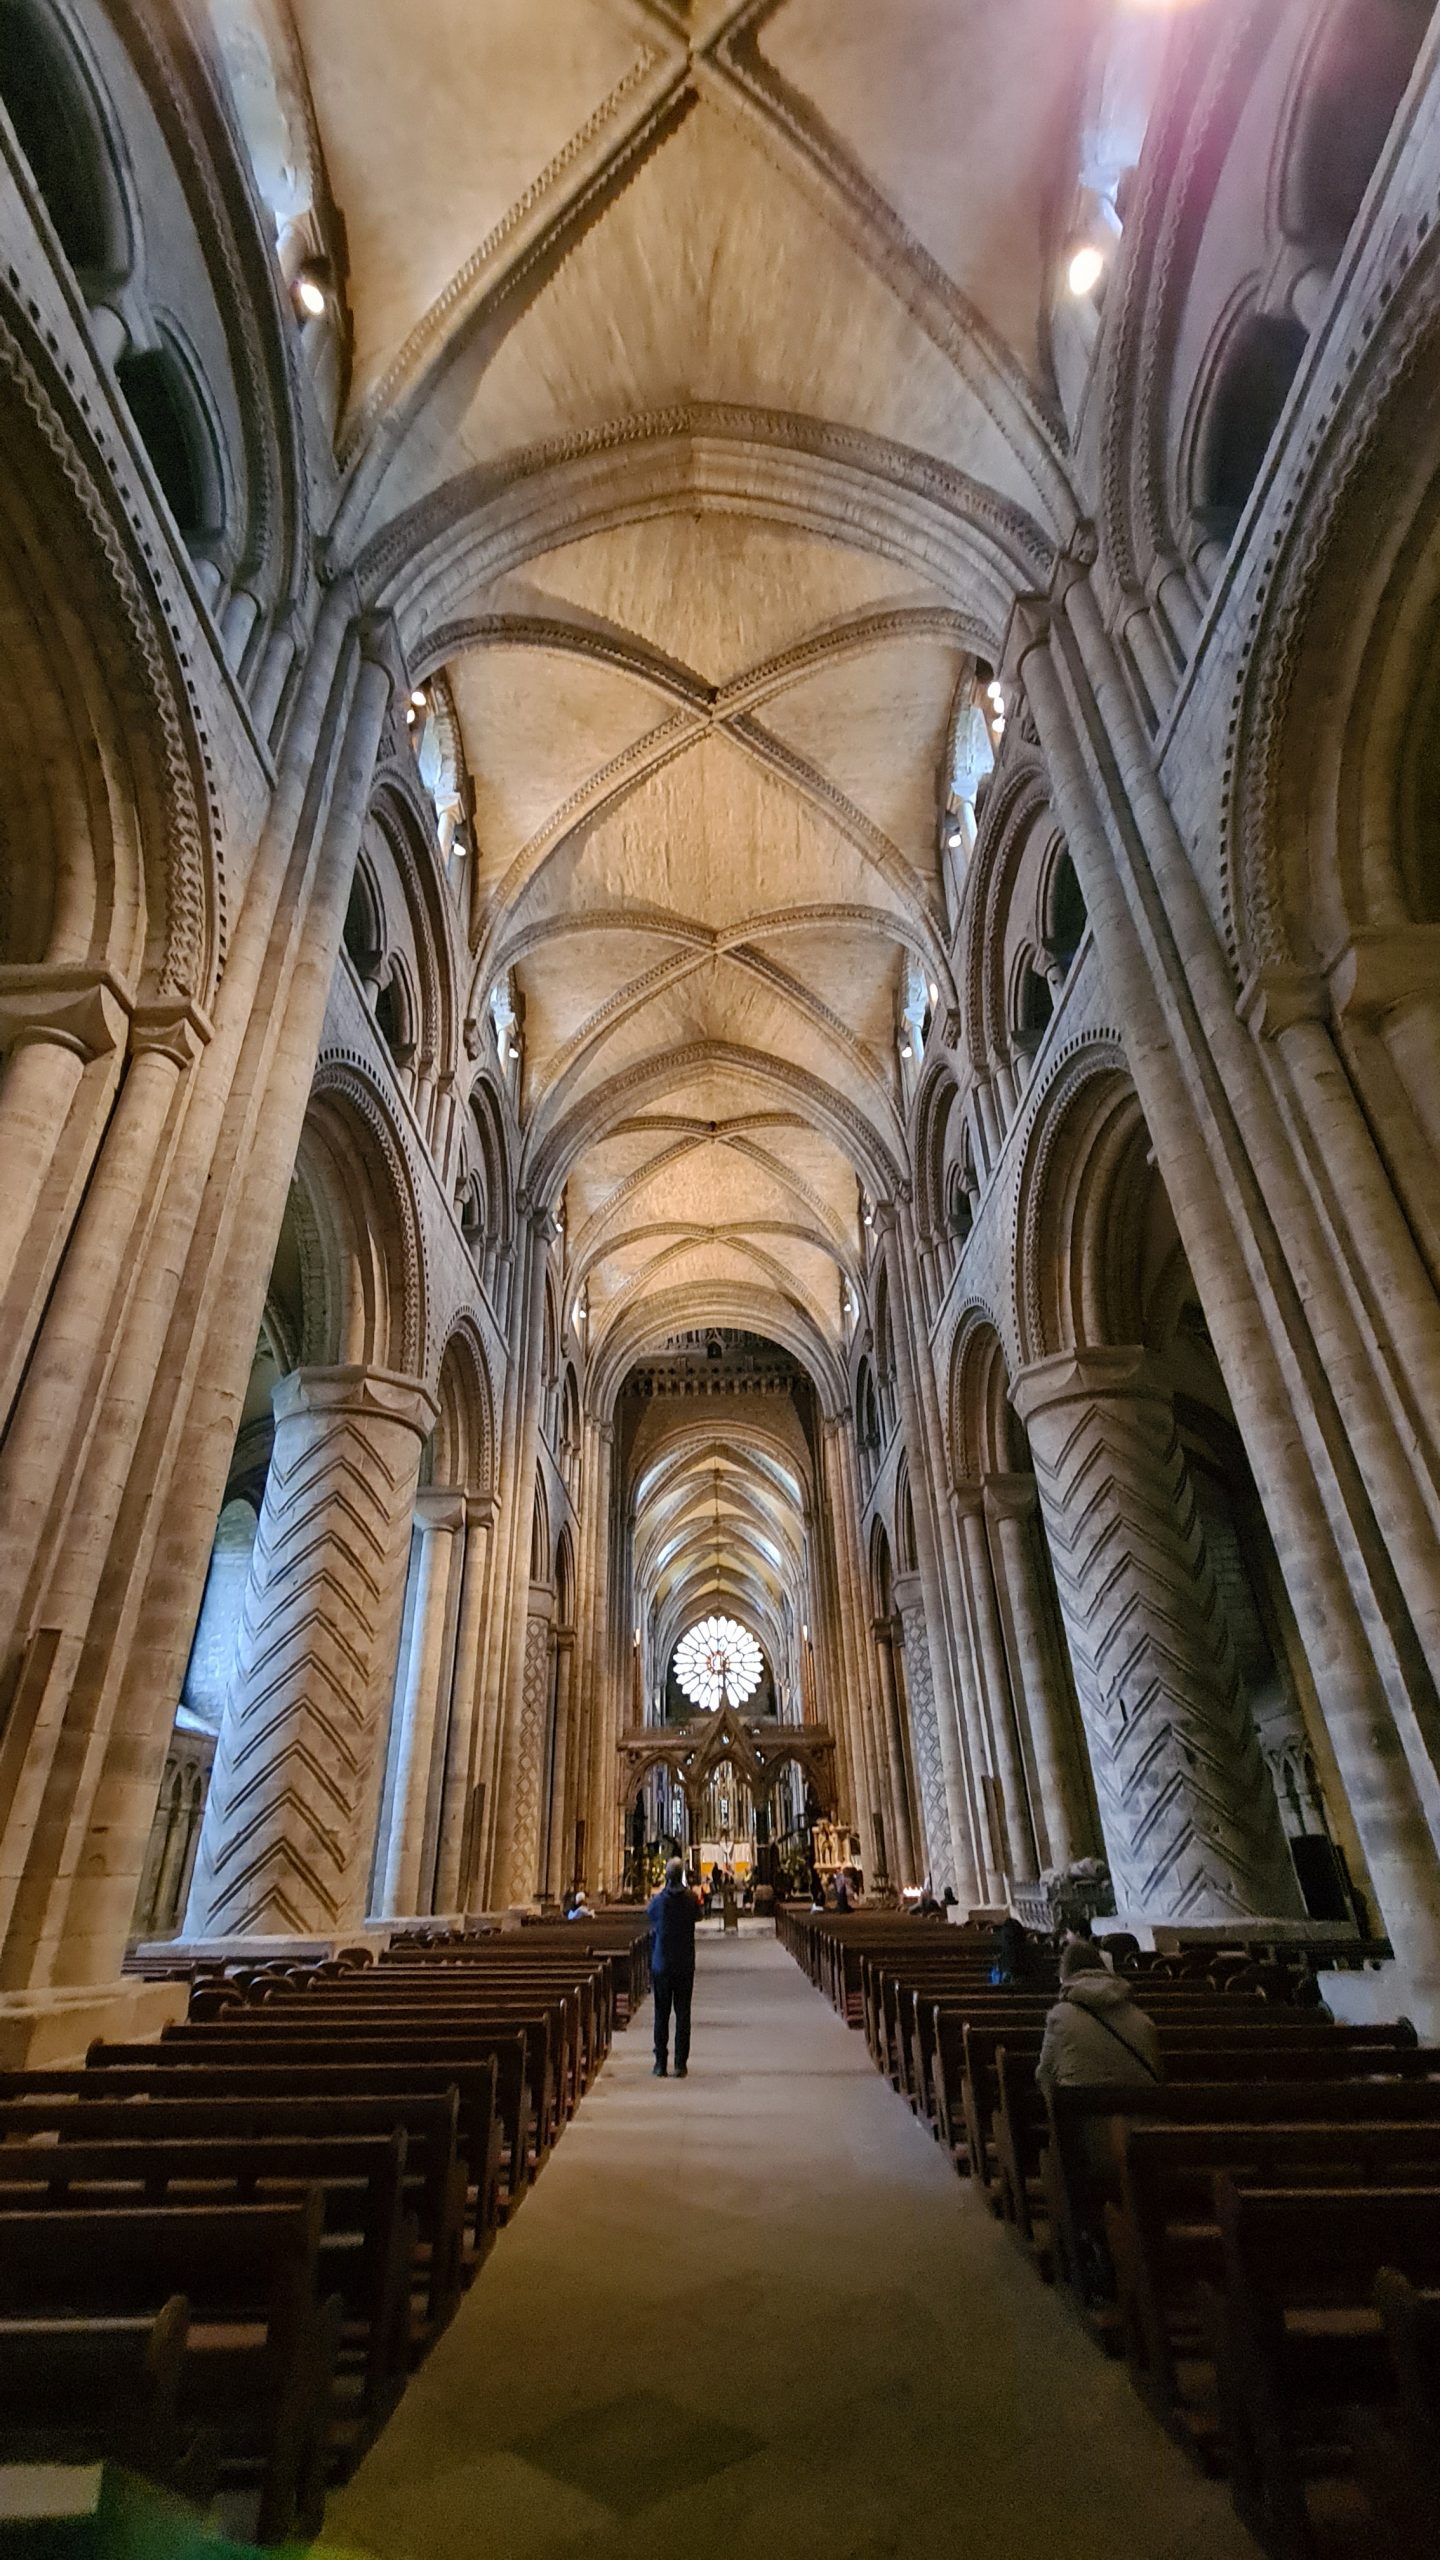 The interior of Durham cathedral in north east England